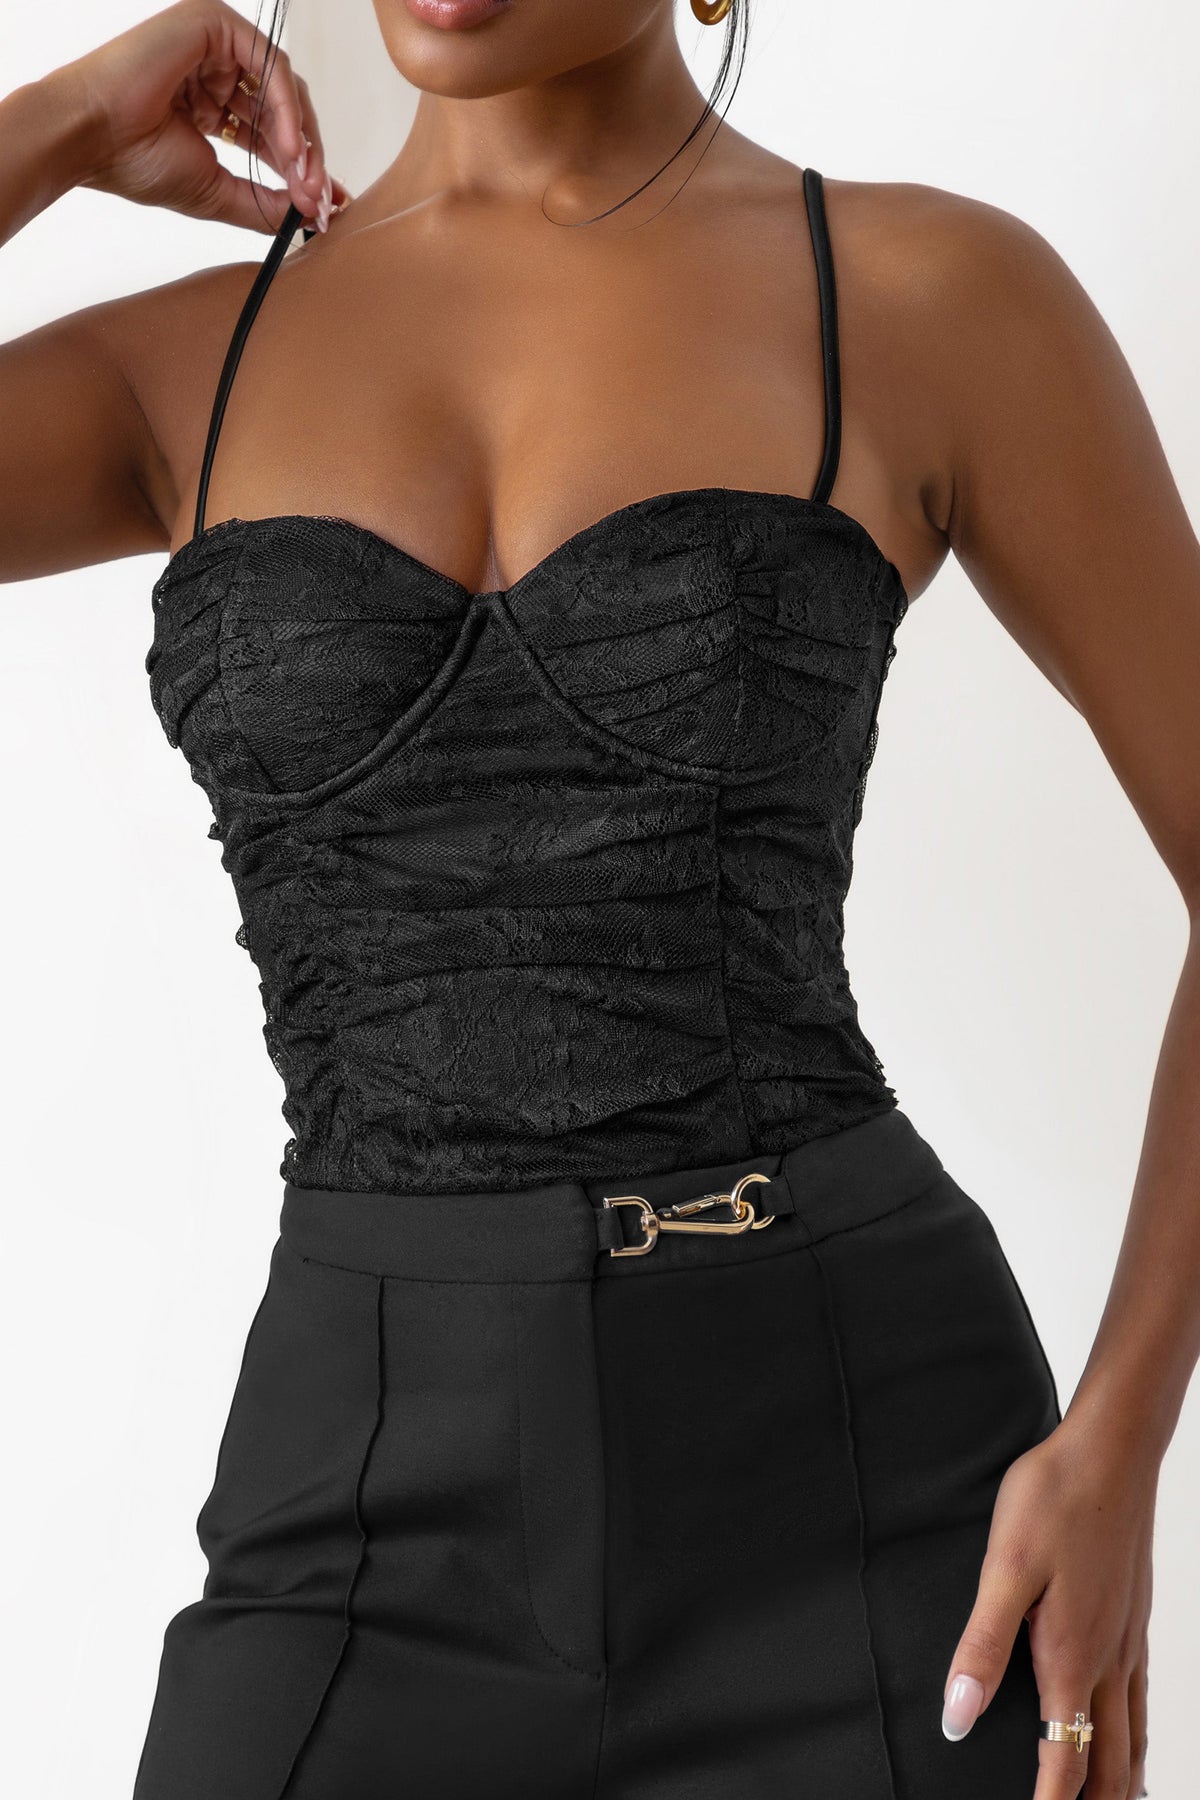 Talulla Black Lace Ruched Mesh Top With Bra Cup Detail – Club L London - AUS